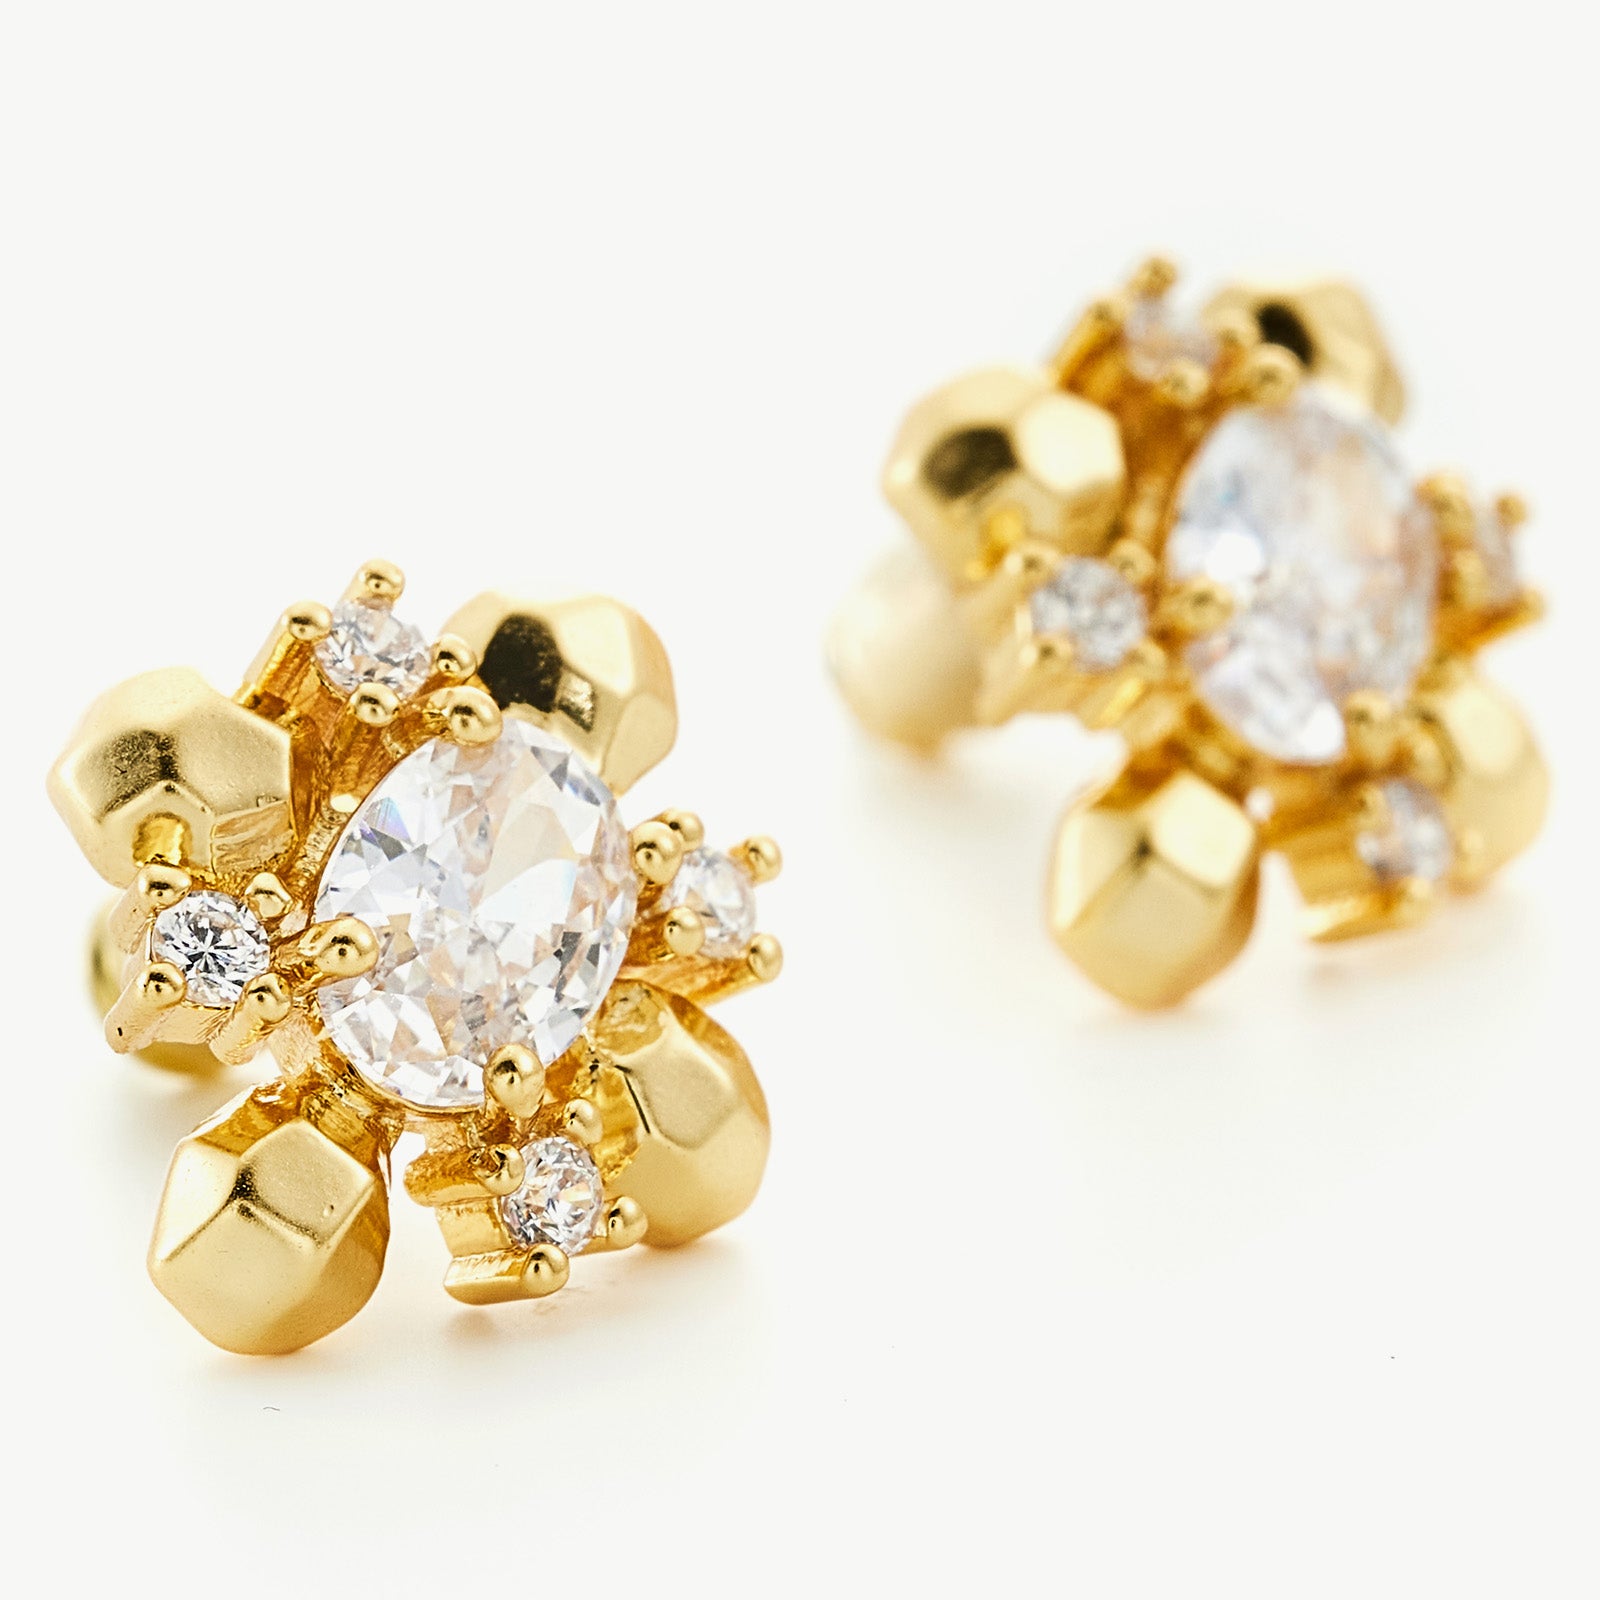 Crystal Stud Earrings, a chic and shimmering accessory that effortlessly elevates your everyday or evening look